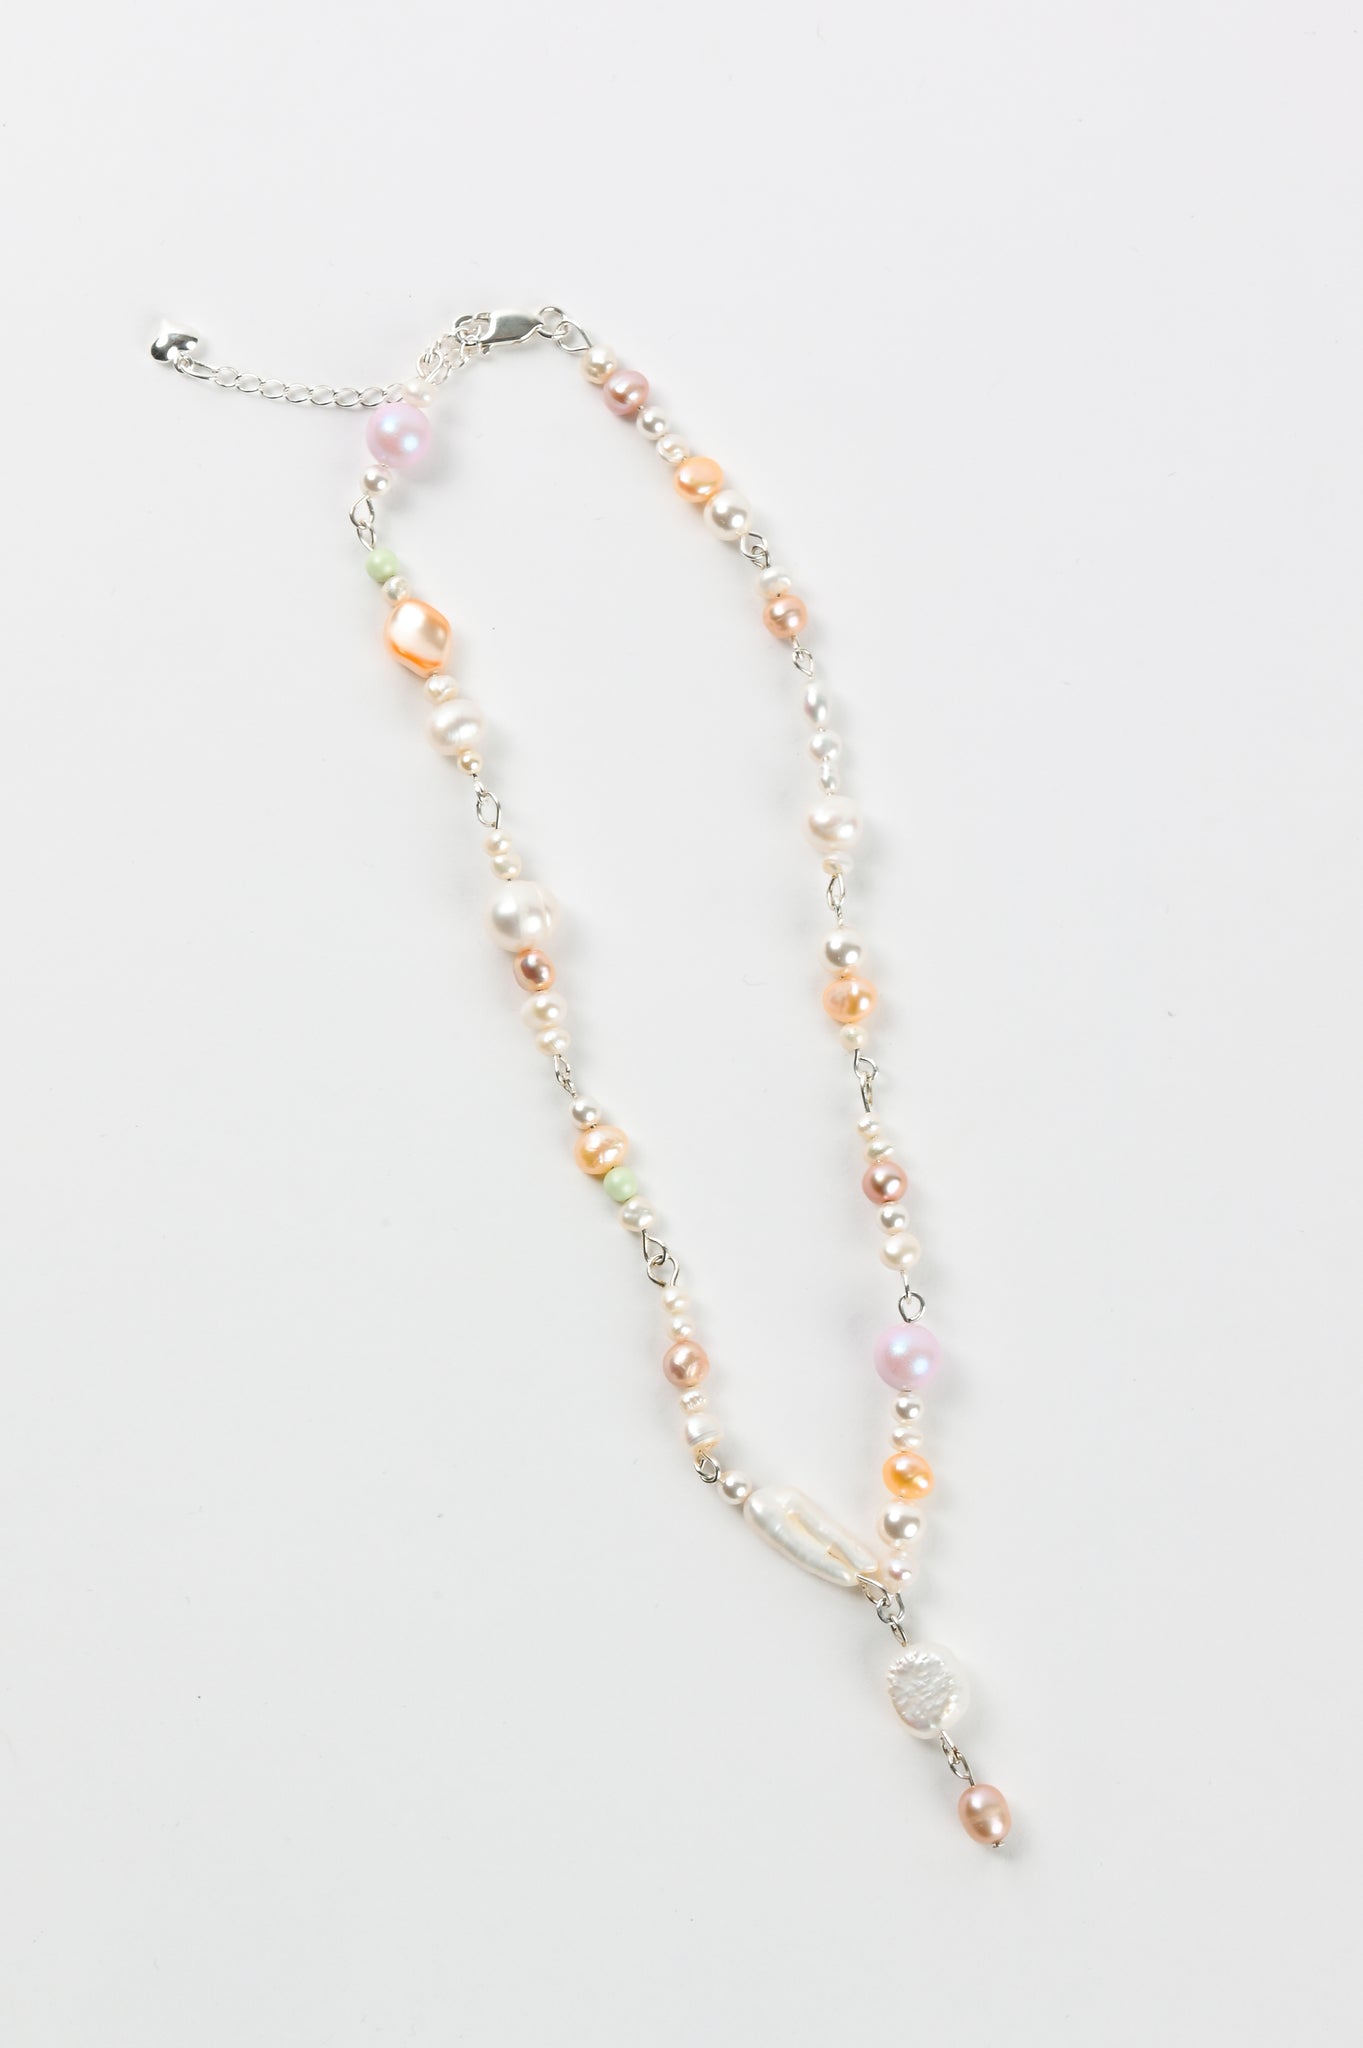 Nadia Ridiandries 'Floating Charm' Necklace In Pink/Orange